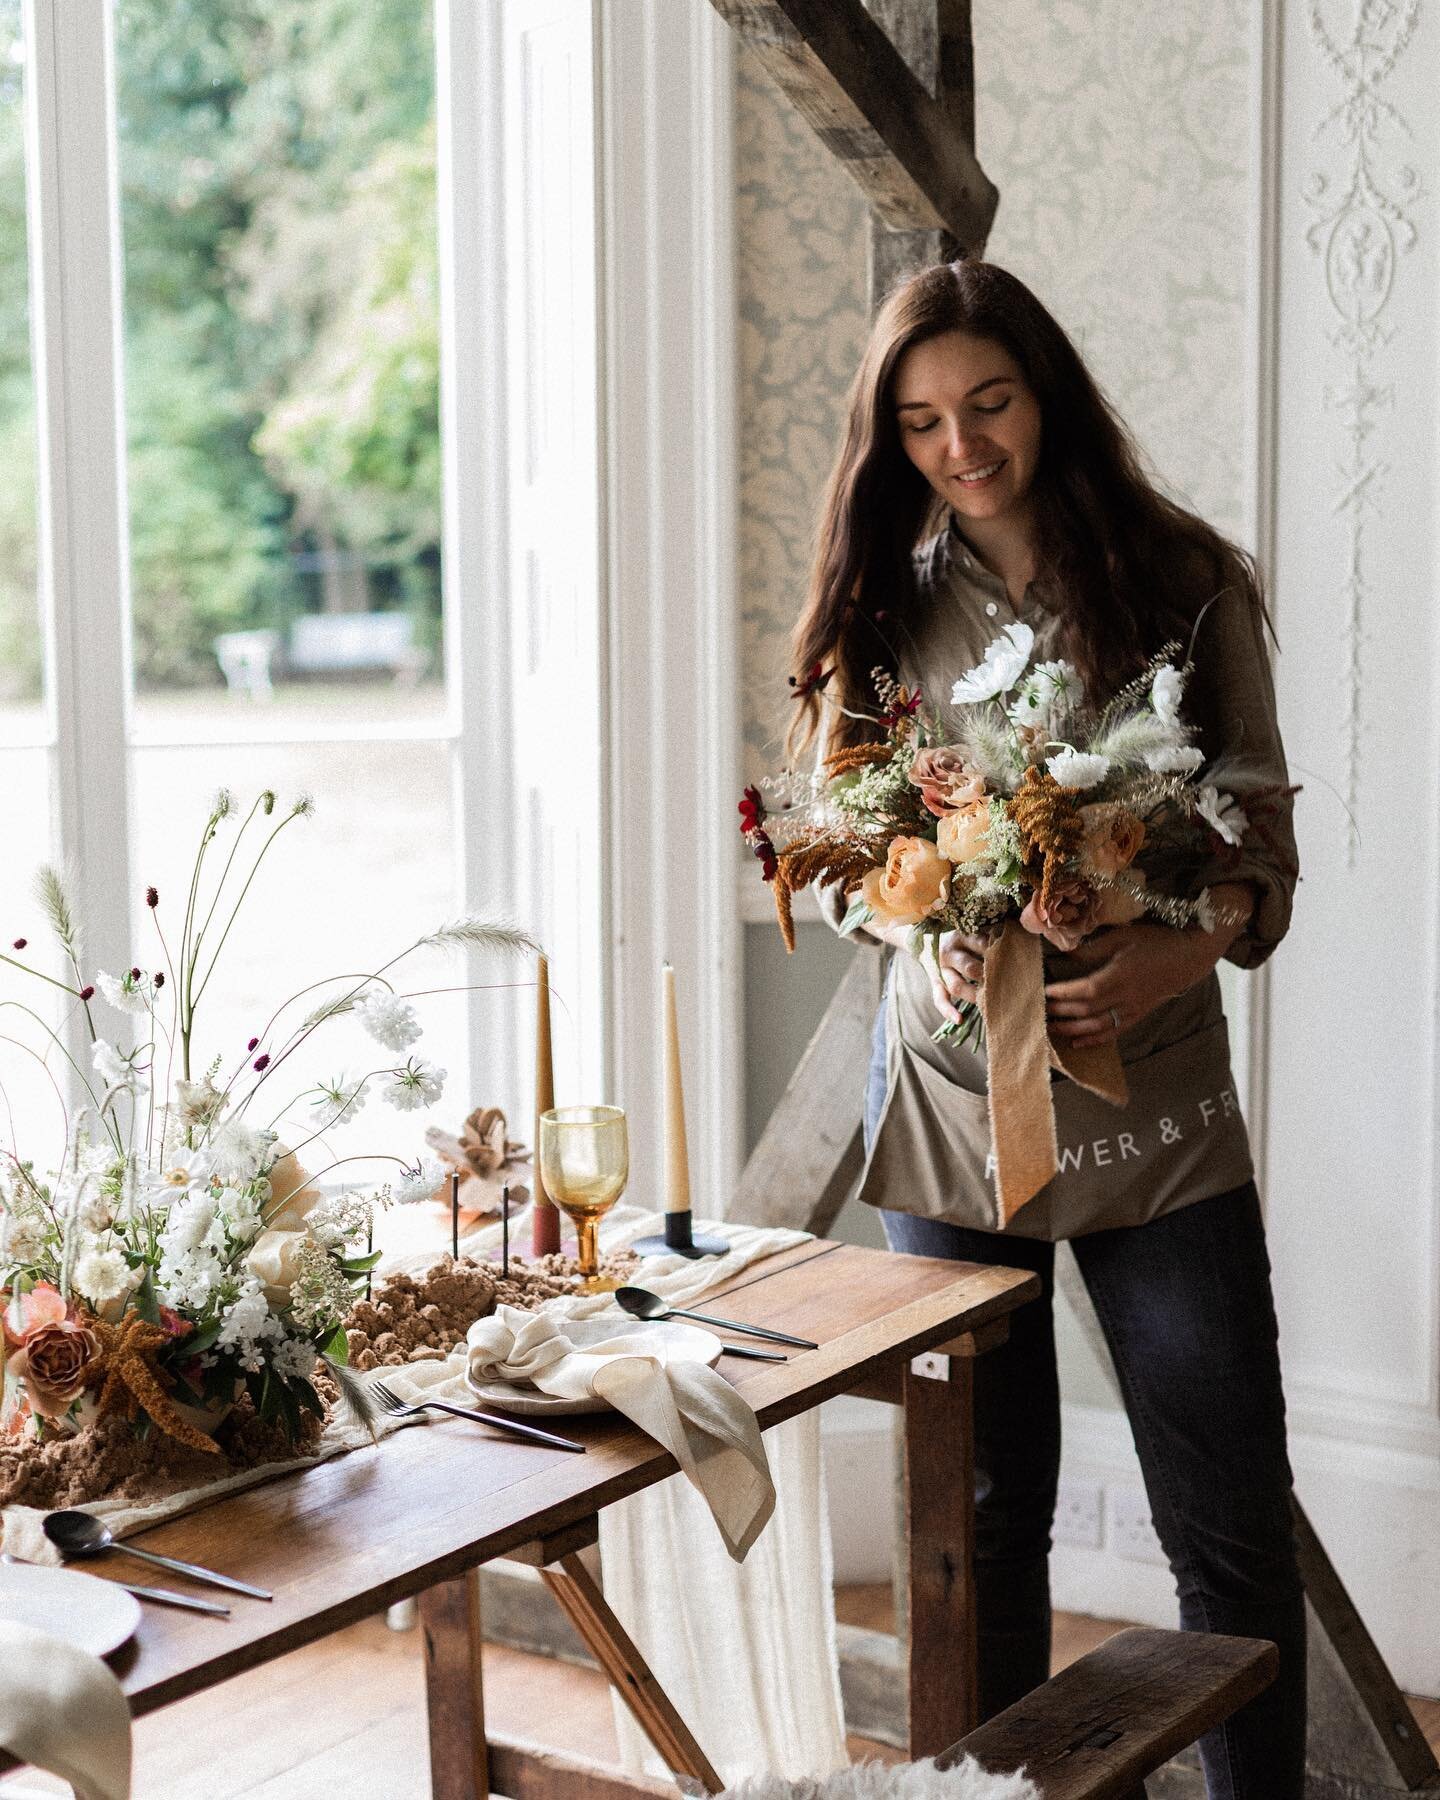 You may have seen on my Stories that I&rsquo;m excited to announce I&rsquo;ll be doing a Spring Floral Workshop at @fieldfoodco on Saturday 20th May! 
If you love flowers, delicious food and sustainability this is the workshop for you. 

Wendy @thech